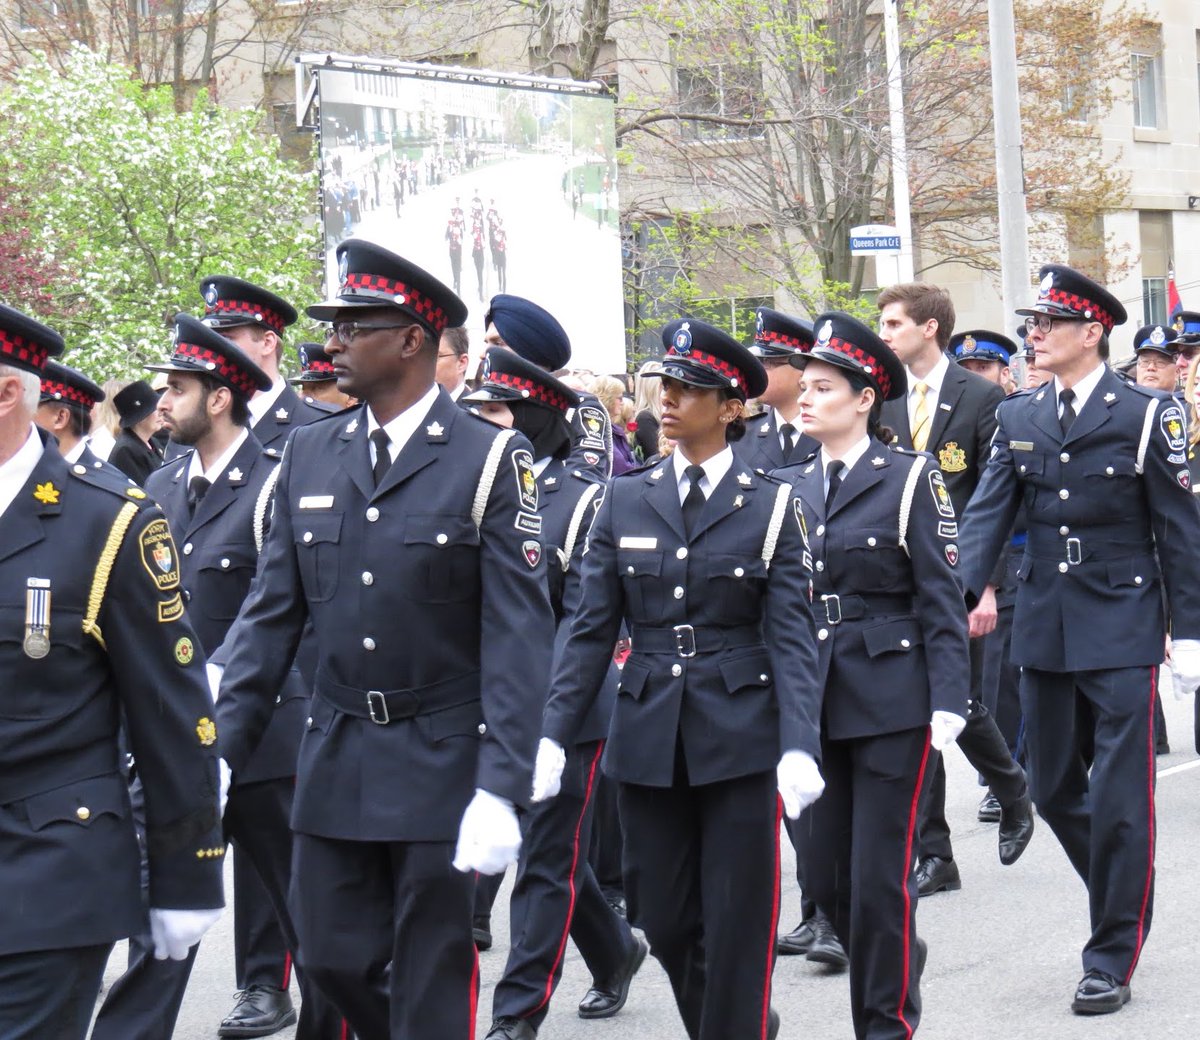 Sunday, May 5th at 11am we will gather at Queen's Park for the 25th Annual Ceremony of Remembrance for Ontario’s fallen police officers and honour our officers who paid the ultimate price. All are welcomed to attend. #WeRemember #HeroesInLife @HeroesInLife